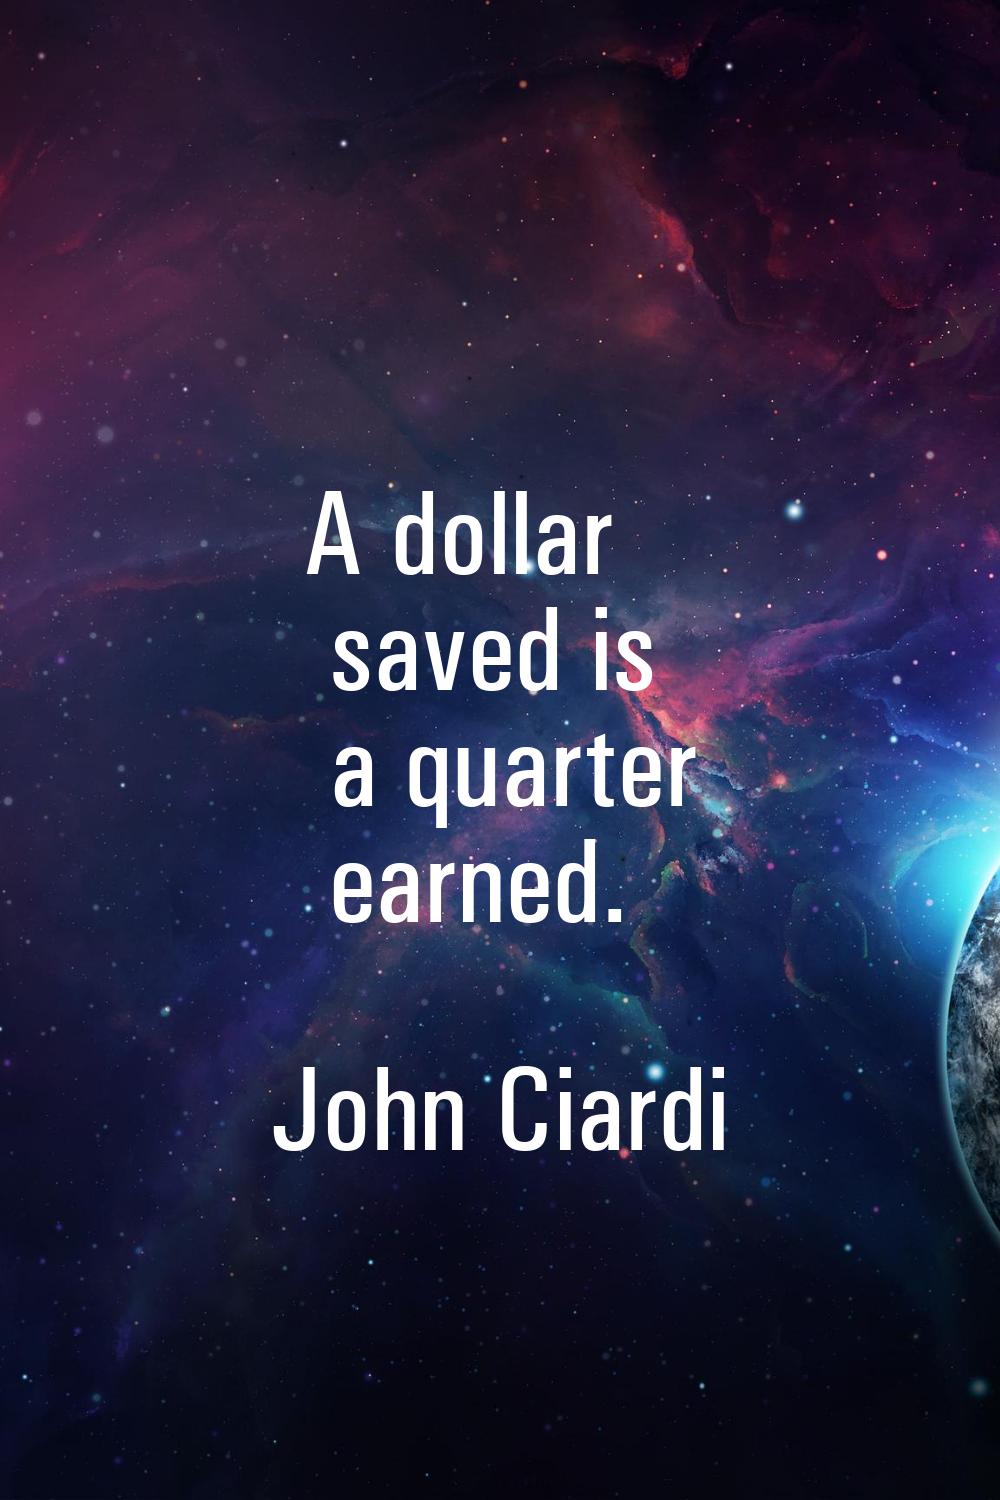 A dollar saved is a quarter earned.